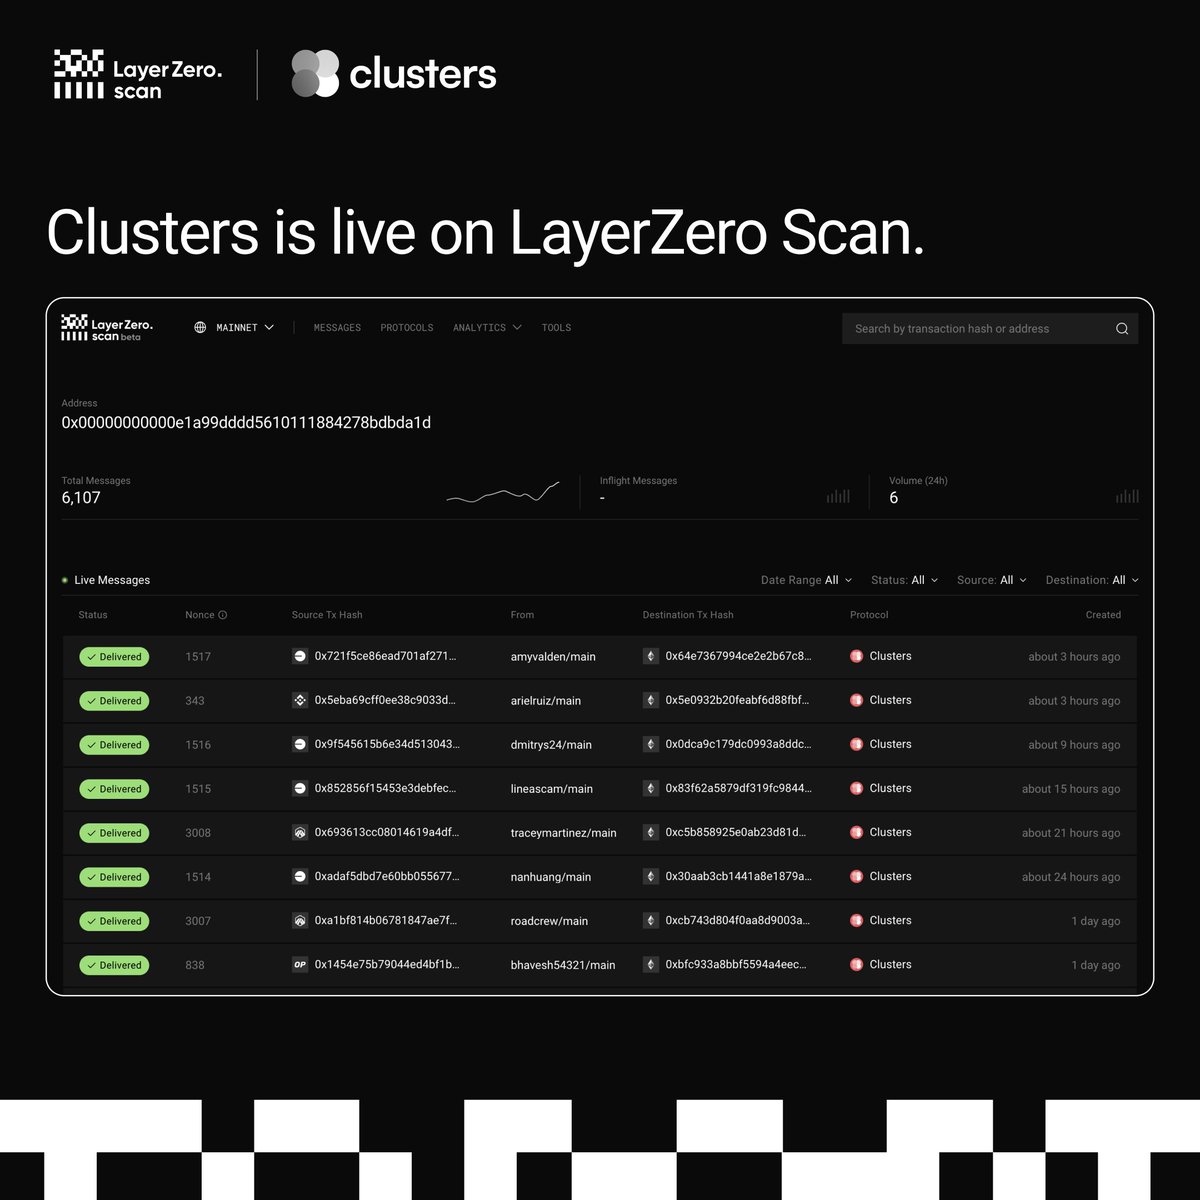 ⚡ LayerZero Scan Update ⚡ @clustersxyz has been integrated into LayerZero Scan, enabling human-readable tracking of omnichain transactions. All chains. All wallets. One name. Explore the integration at layerzeroscan.com